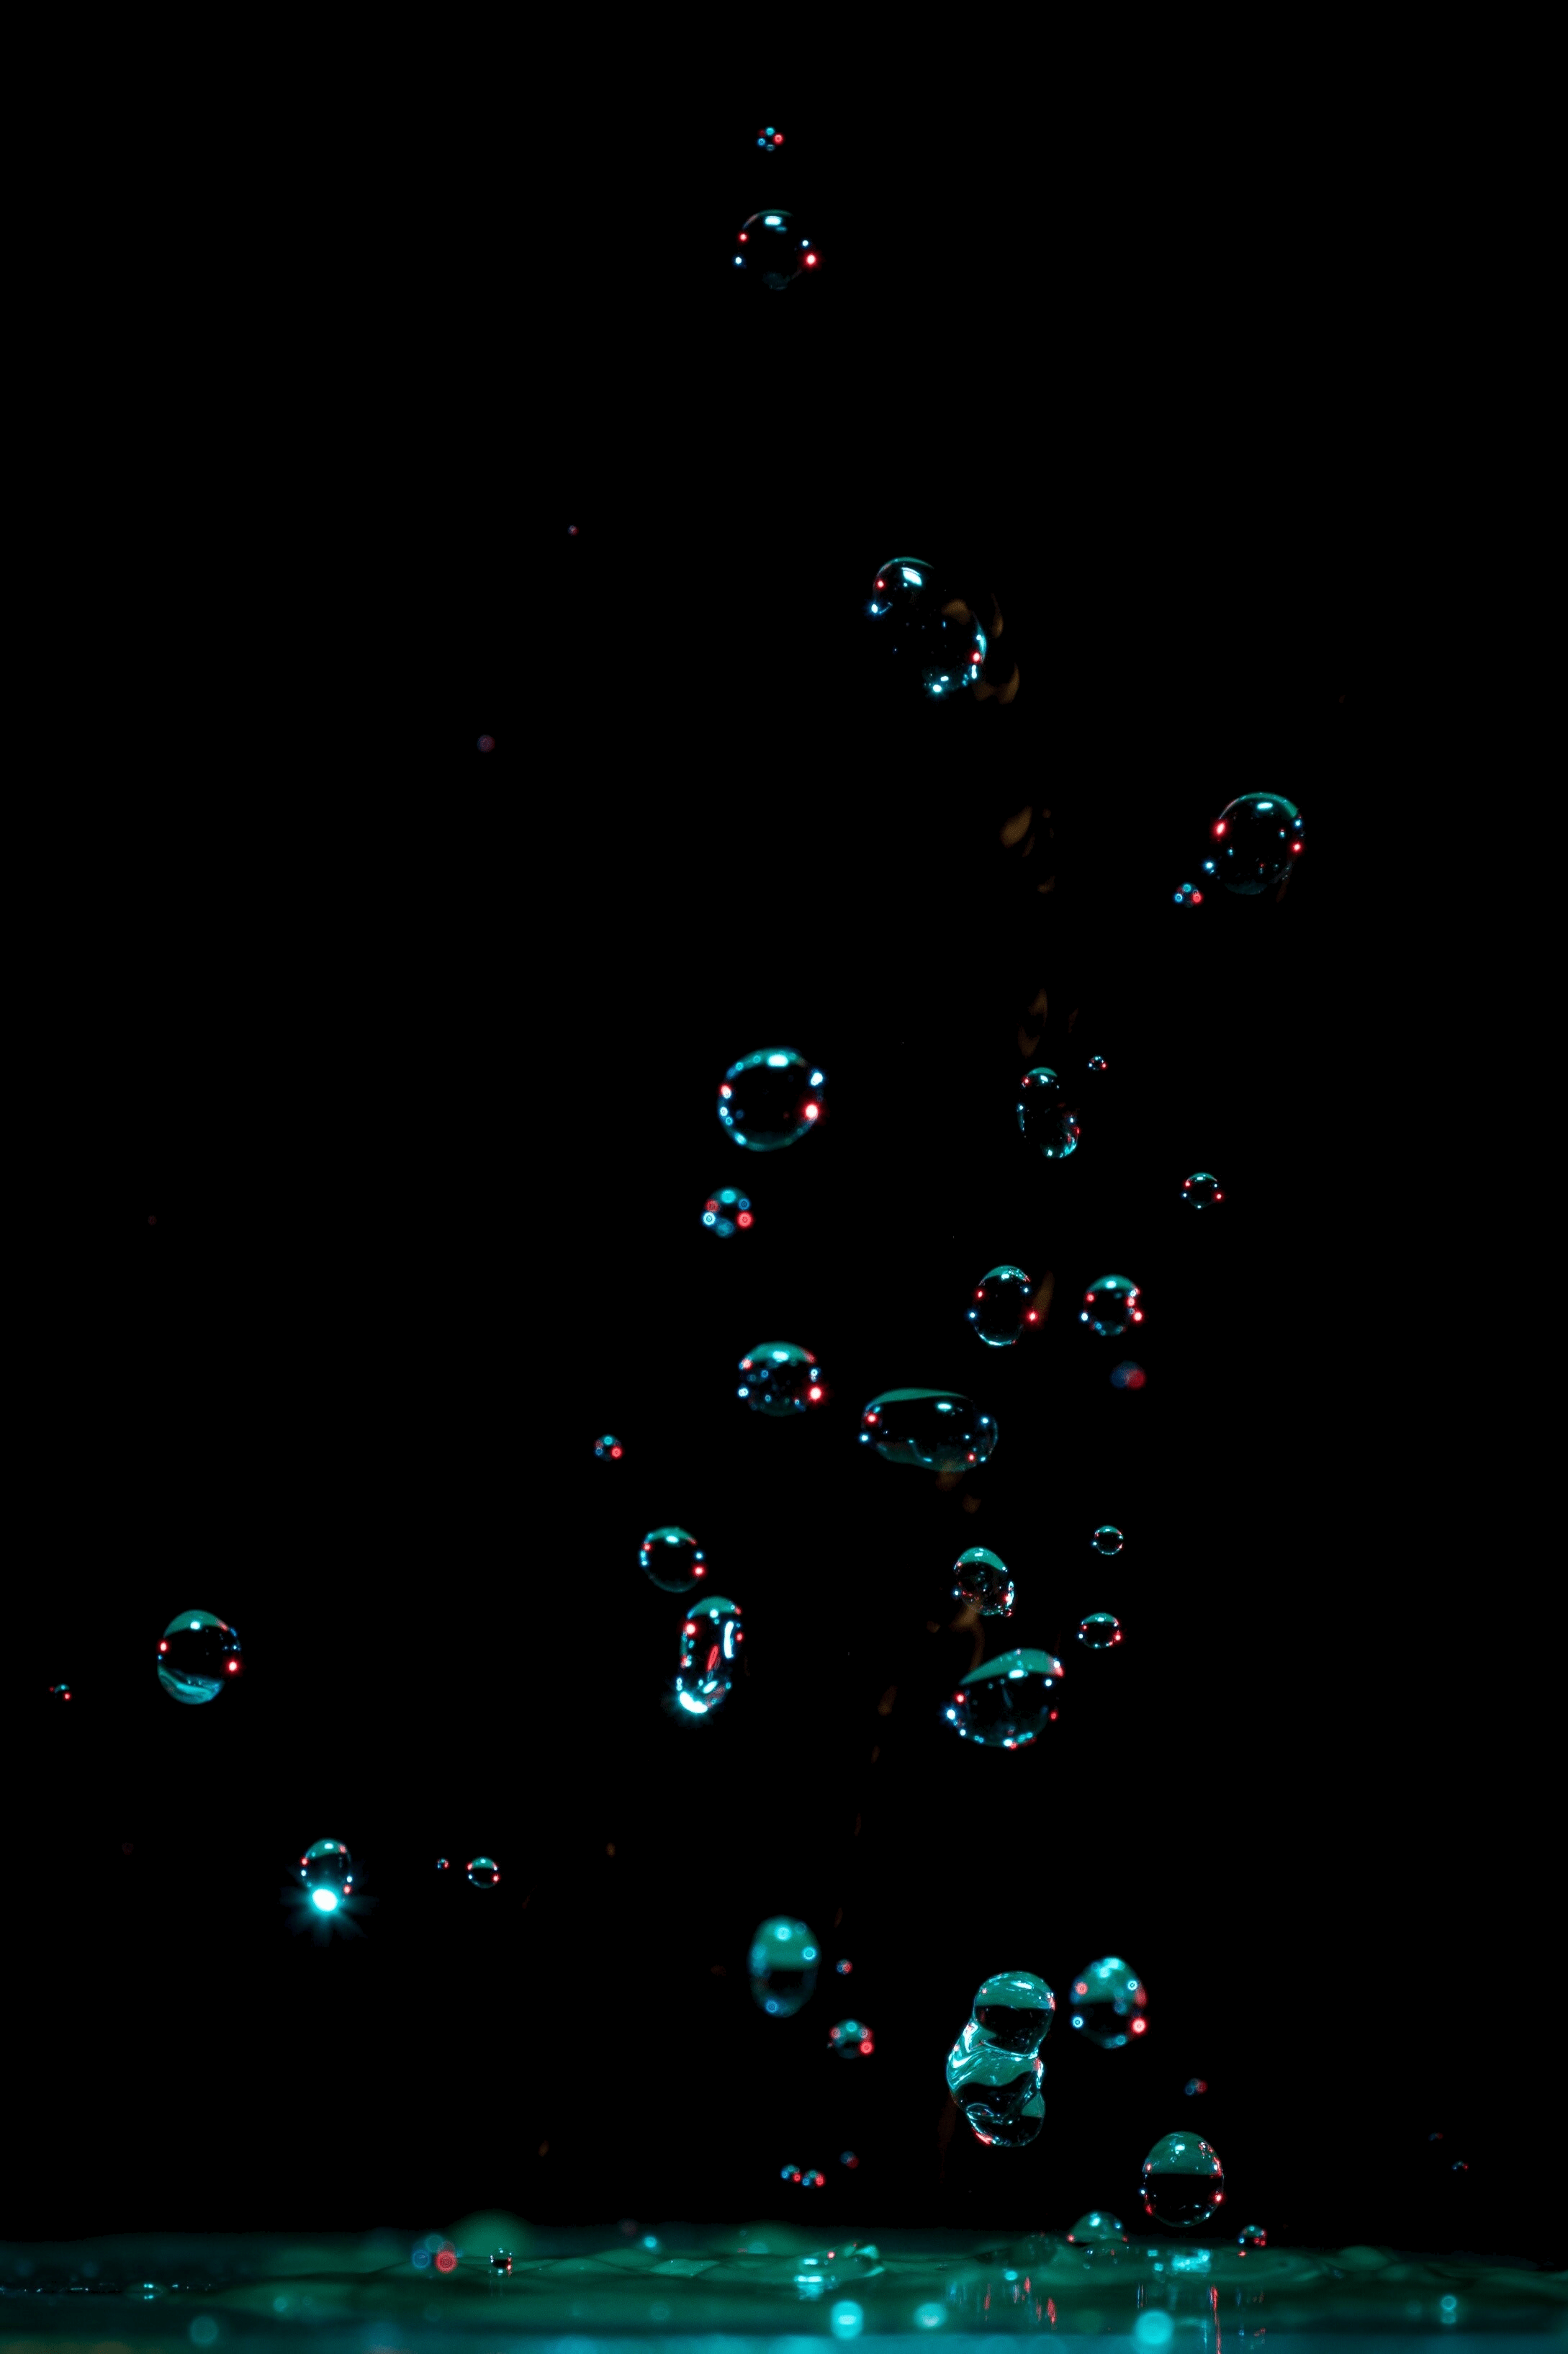 Water droplets splash in the air, creating a beautiful pattern against a black background. - Water